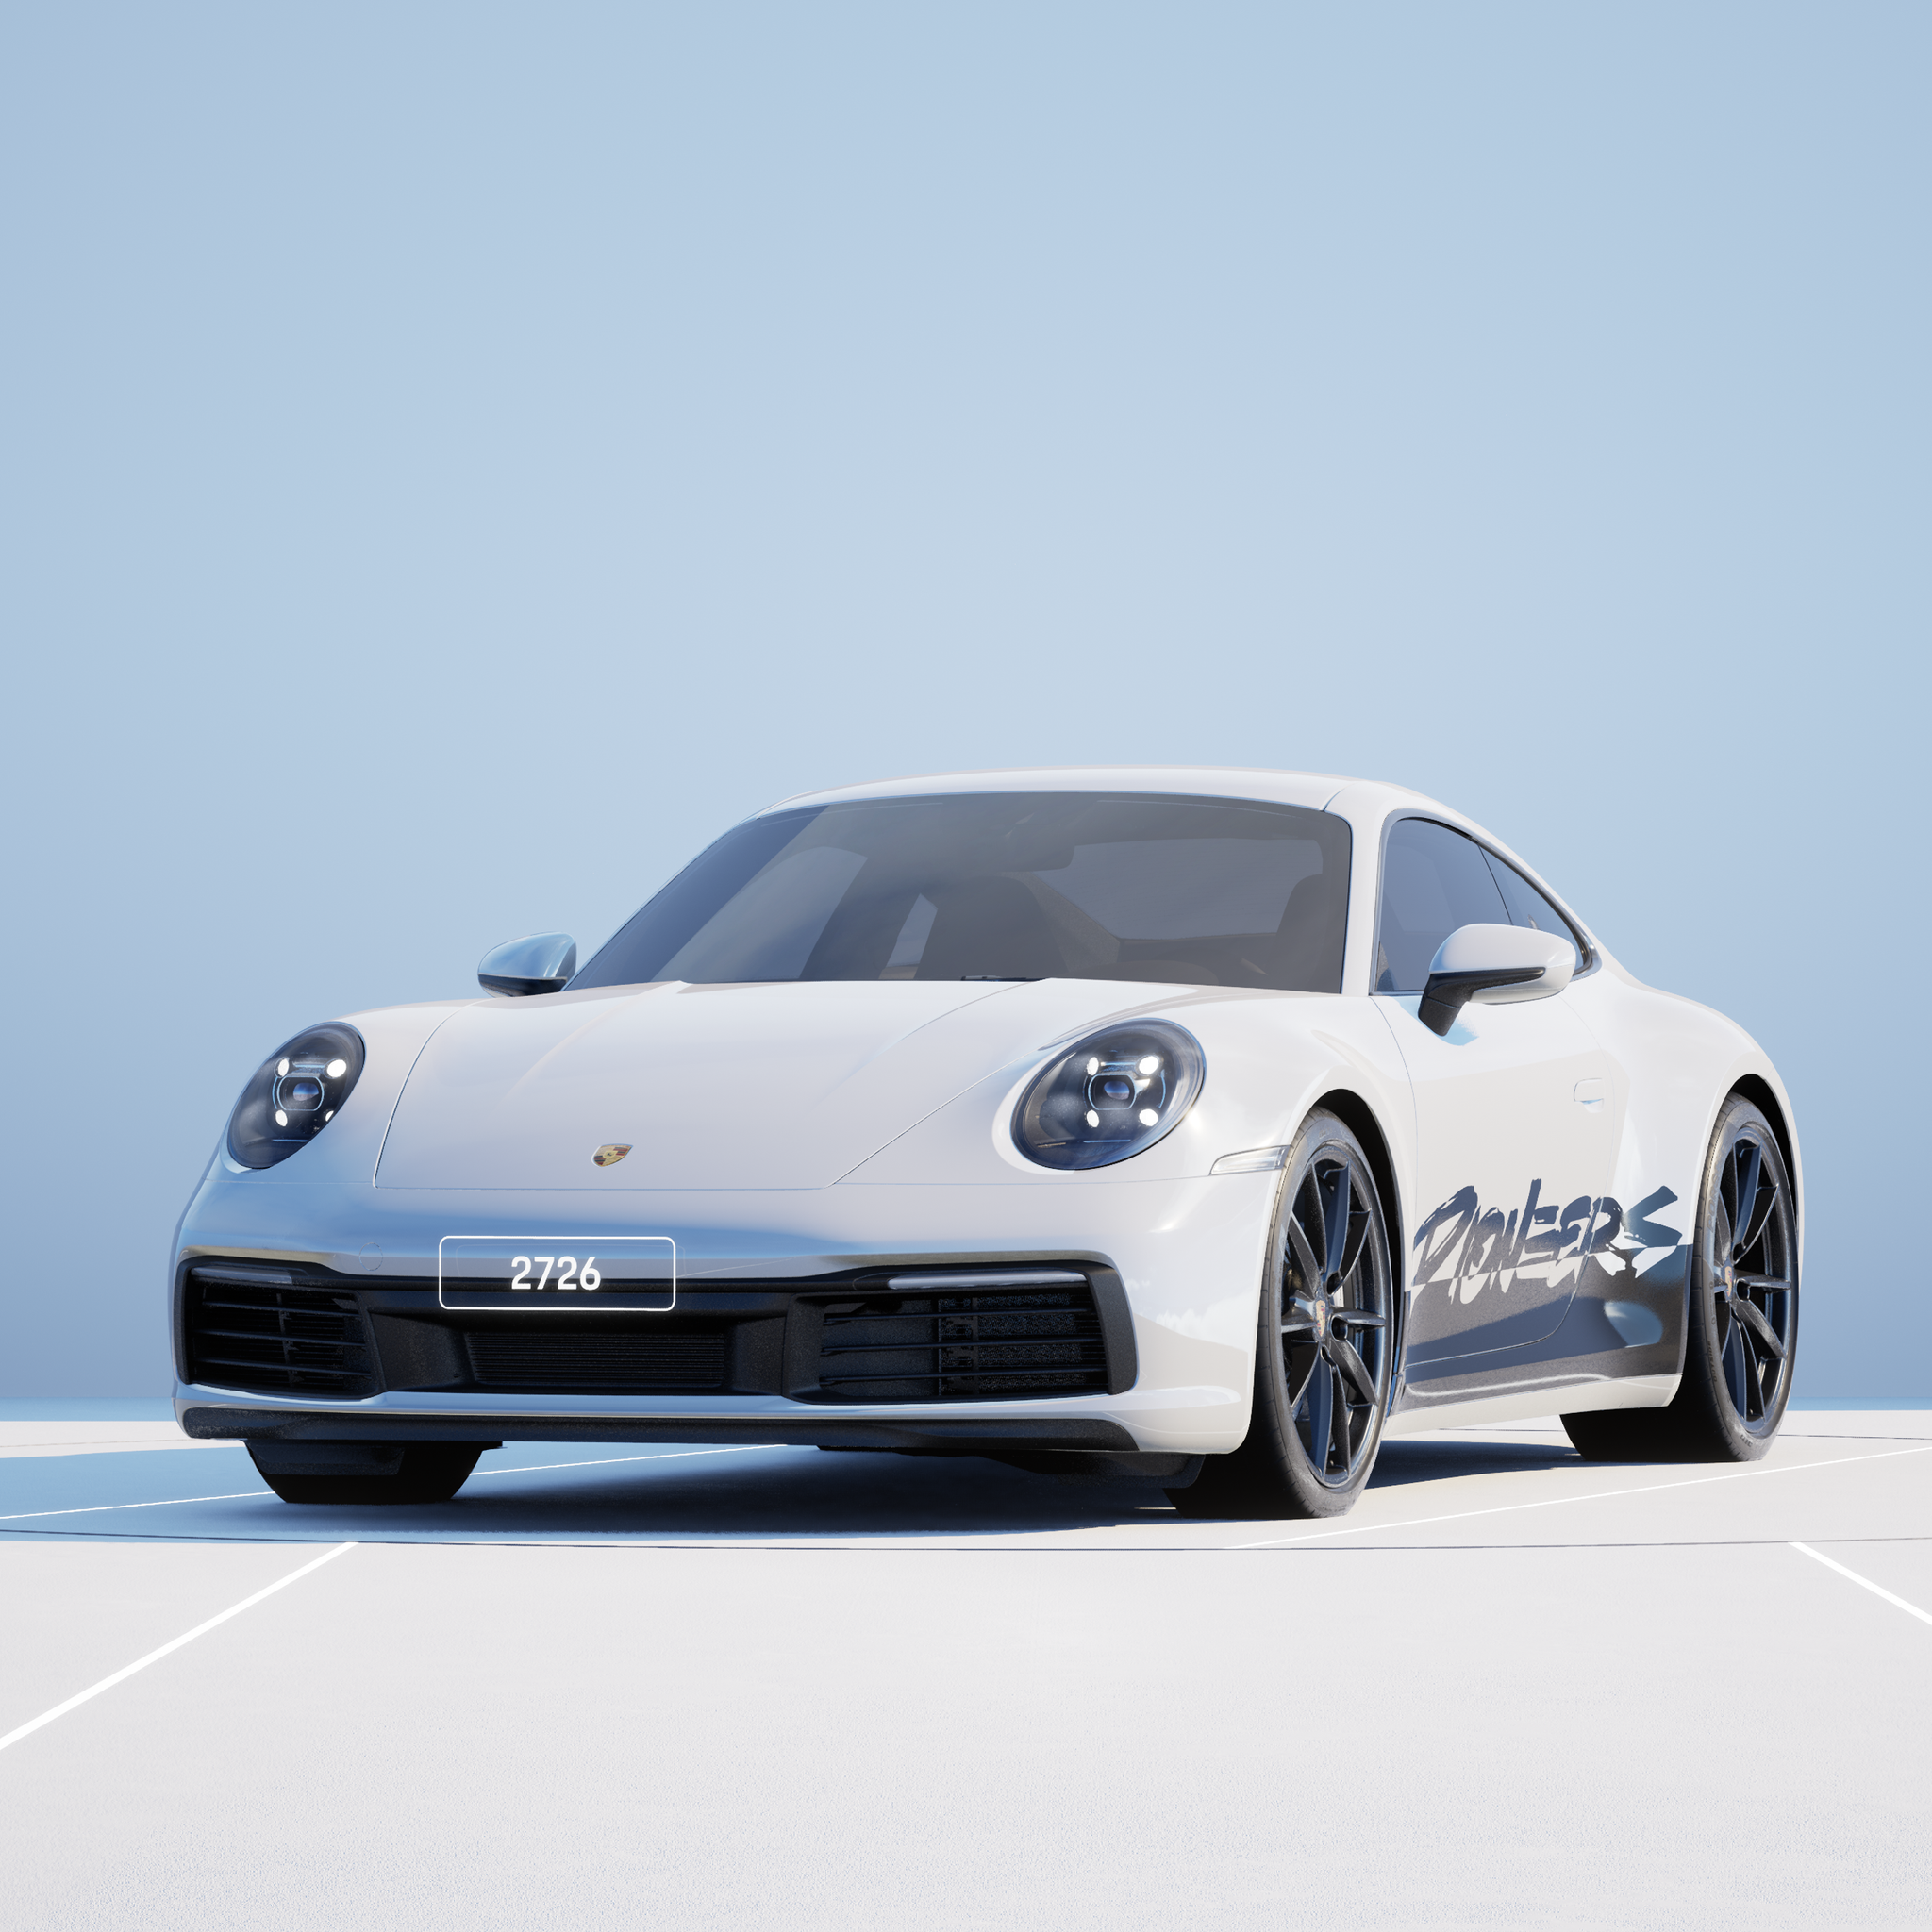 The PORSCHΞ 911 2726 image in phase